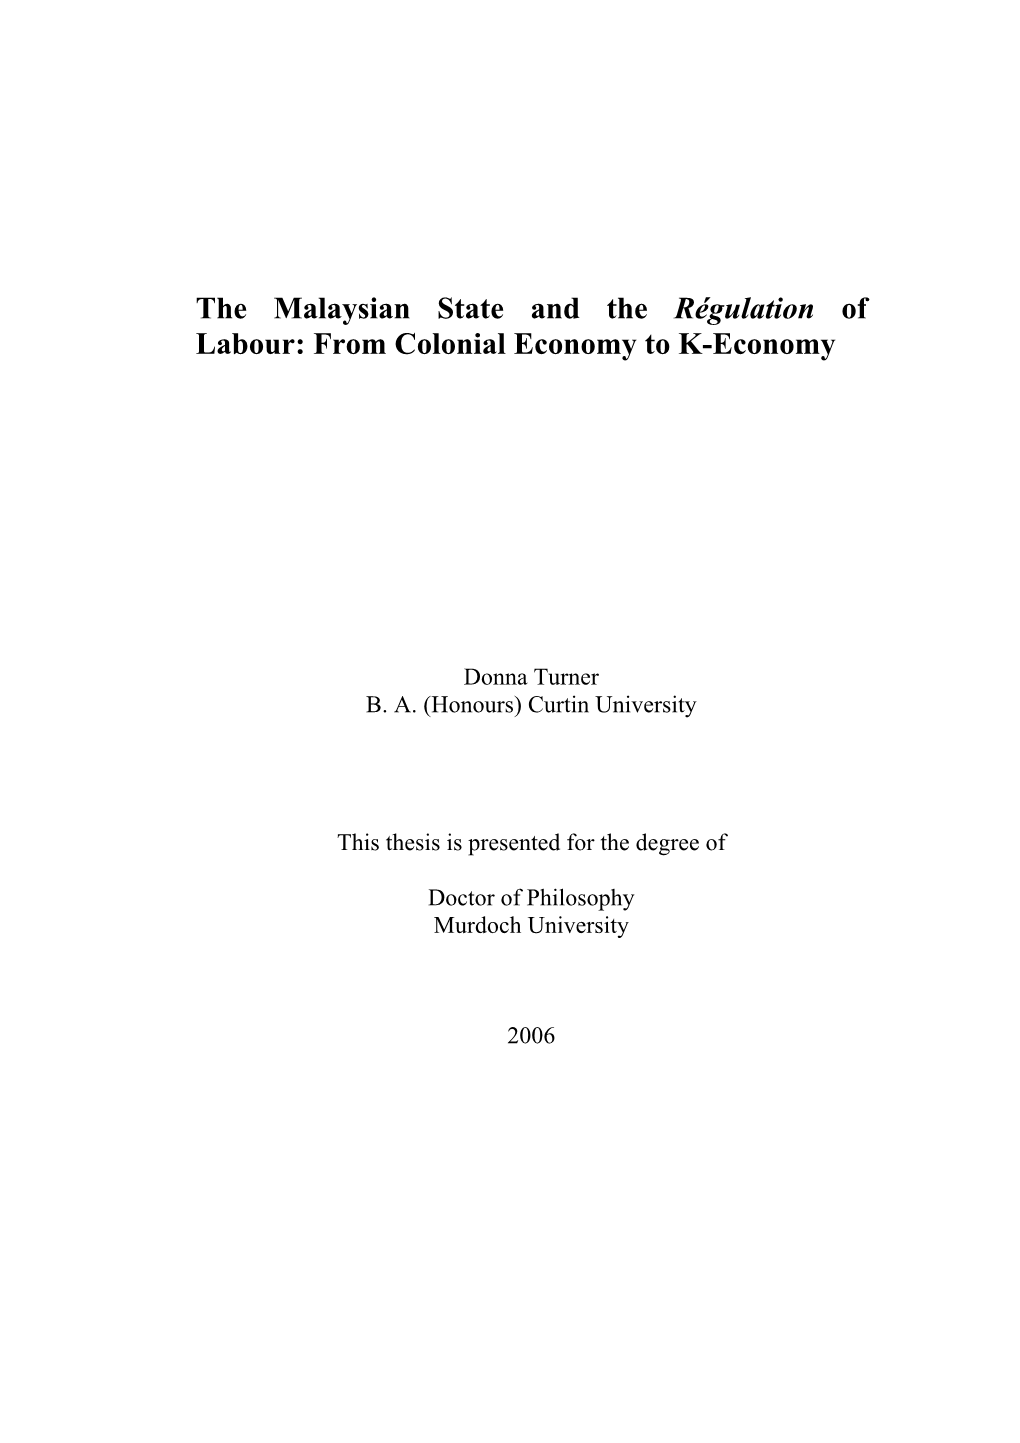 The Malaysian State and the Régulation of Labour: from Colonial Economy to K-Economy